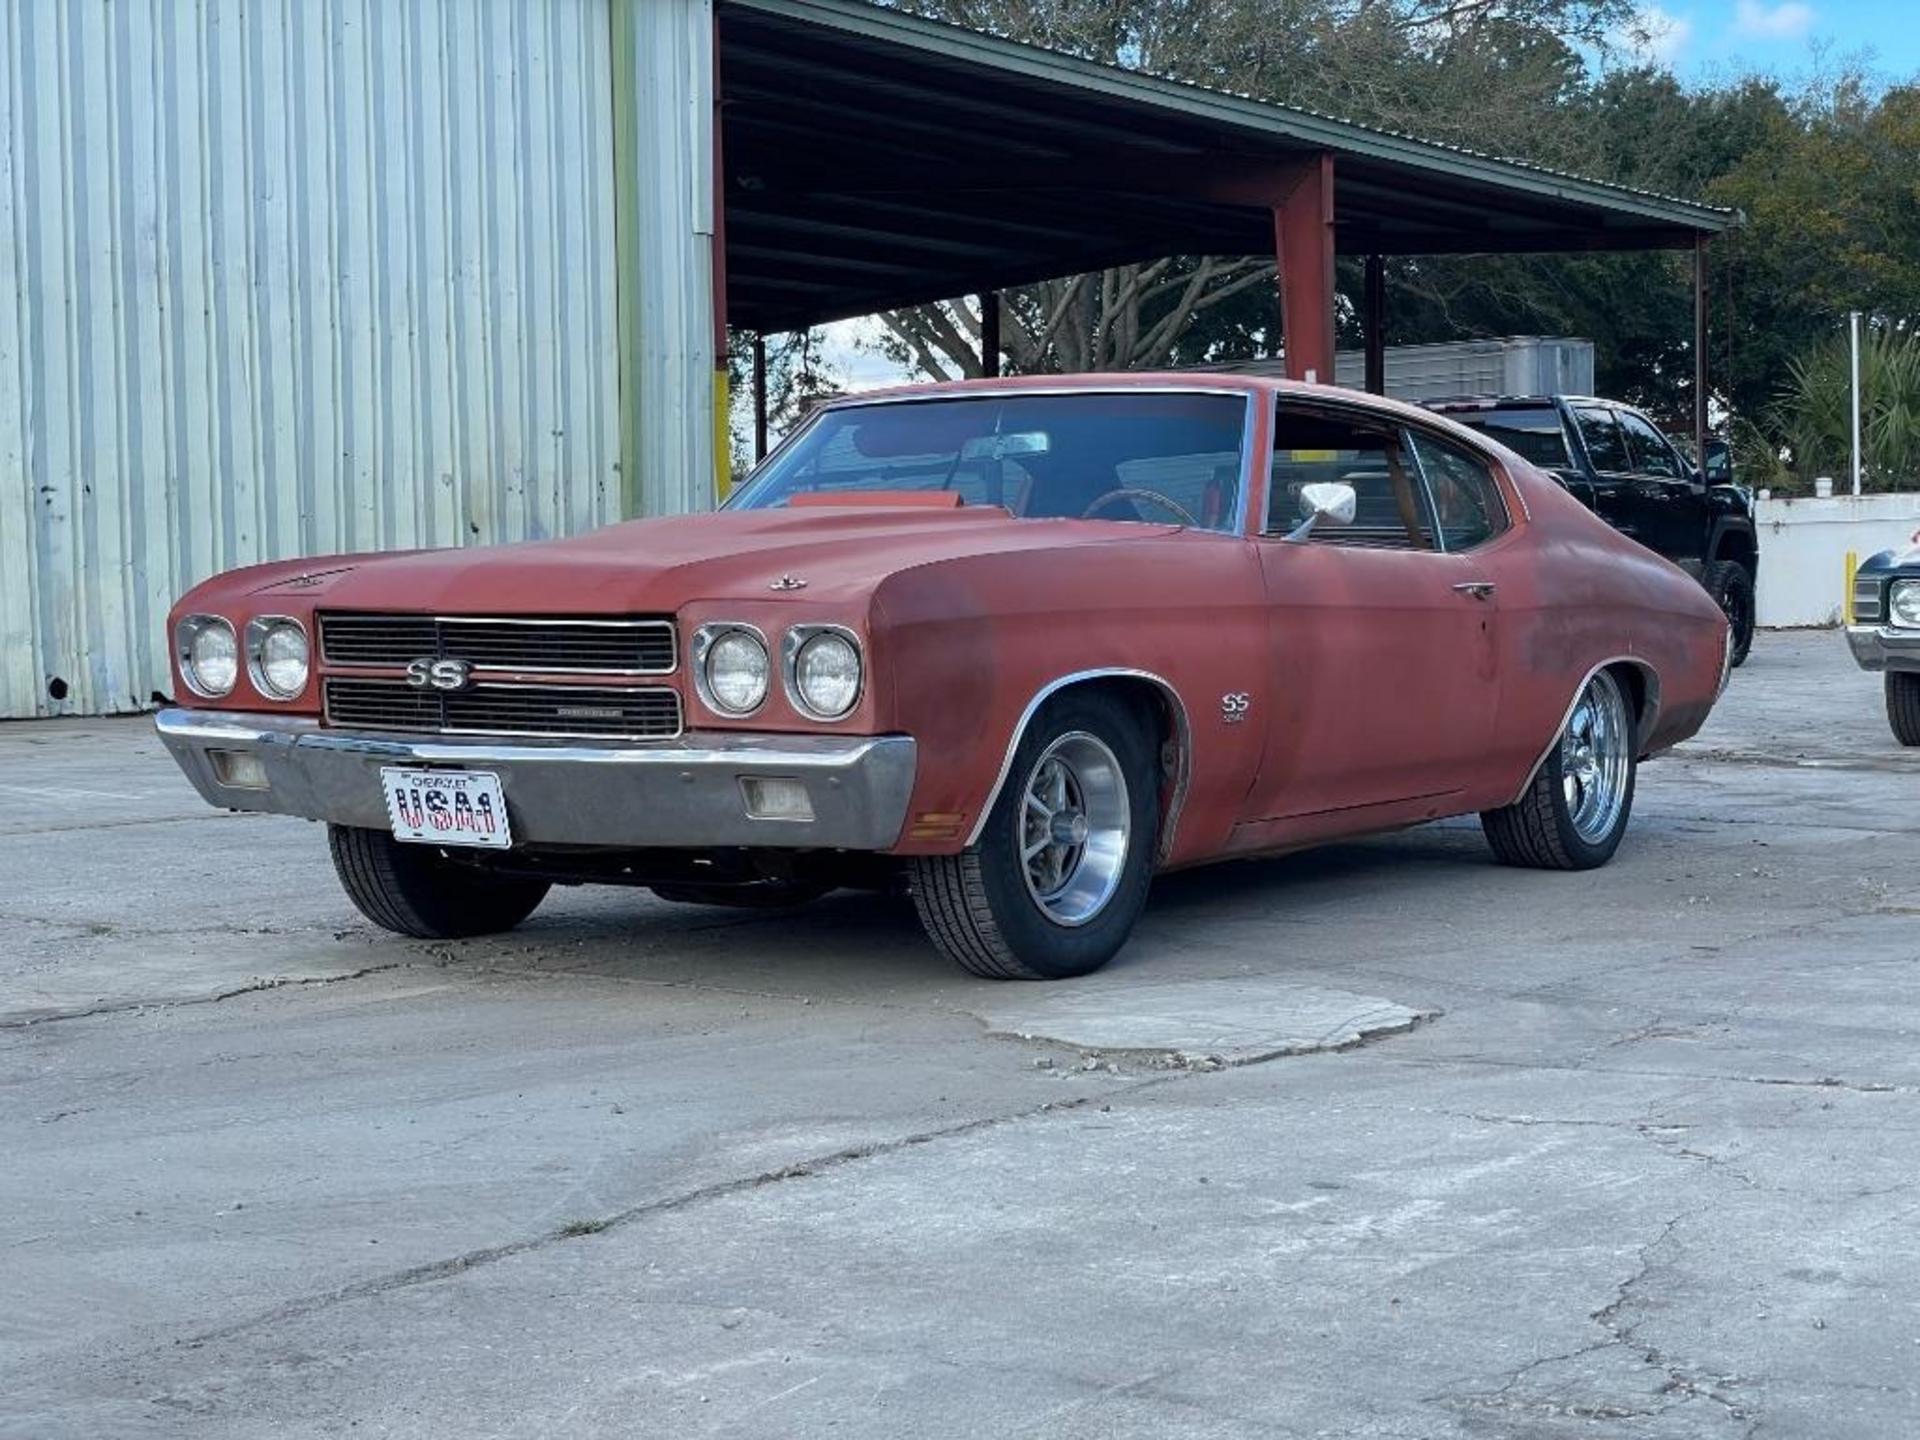 The 1970 Chevrolet Chevelle SS Project Car with Build Shee photos